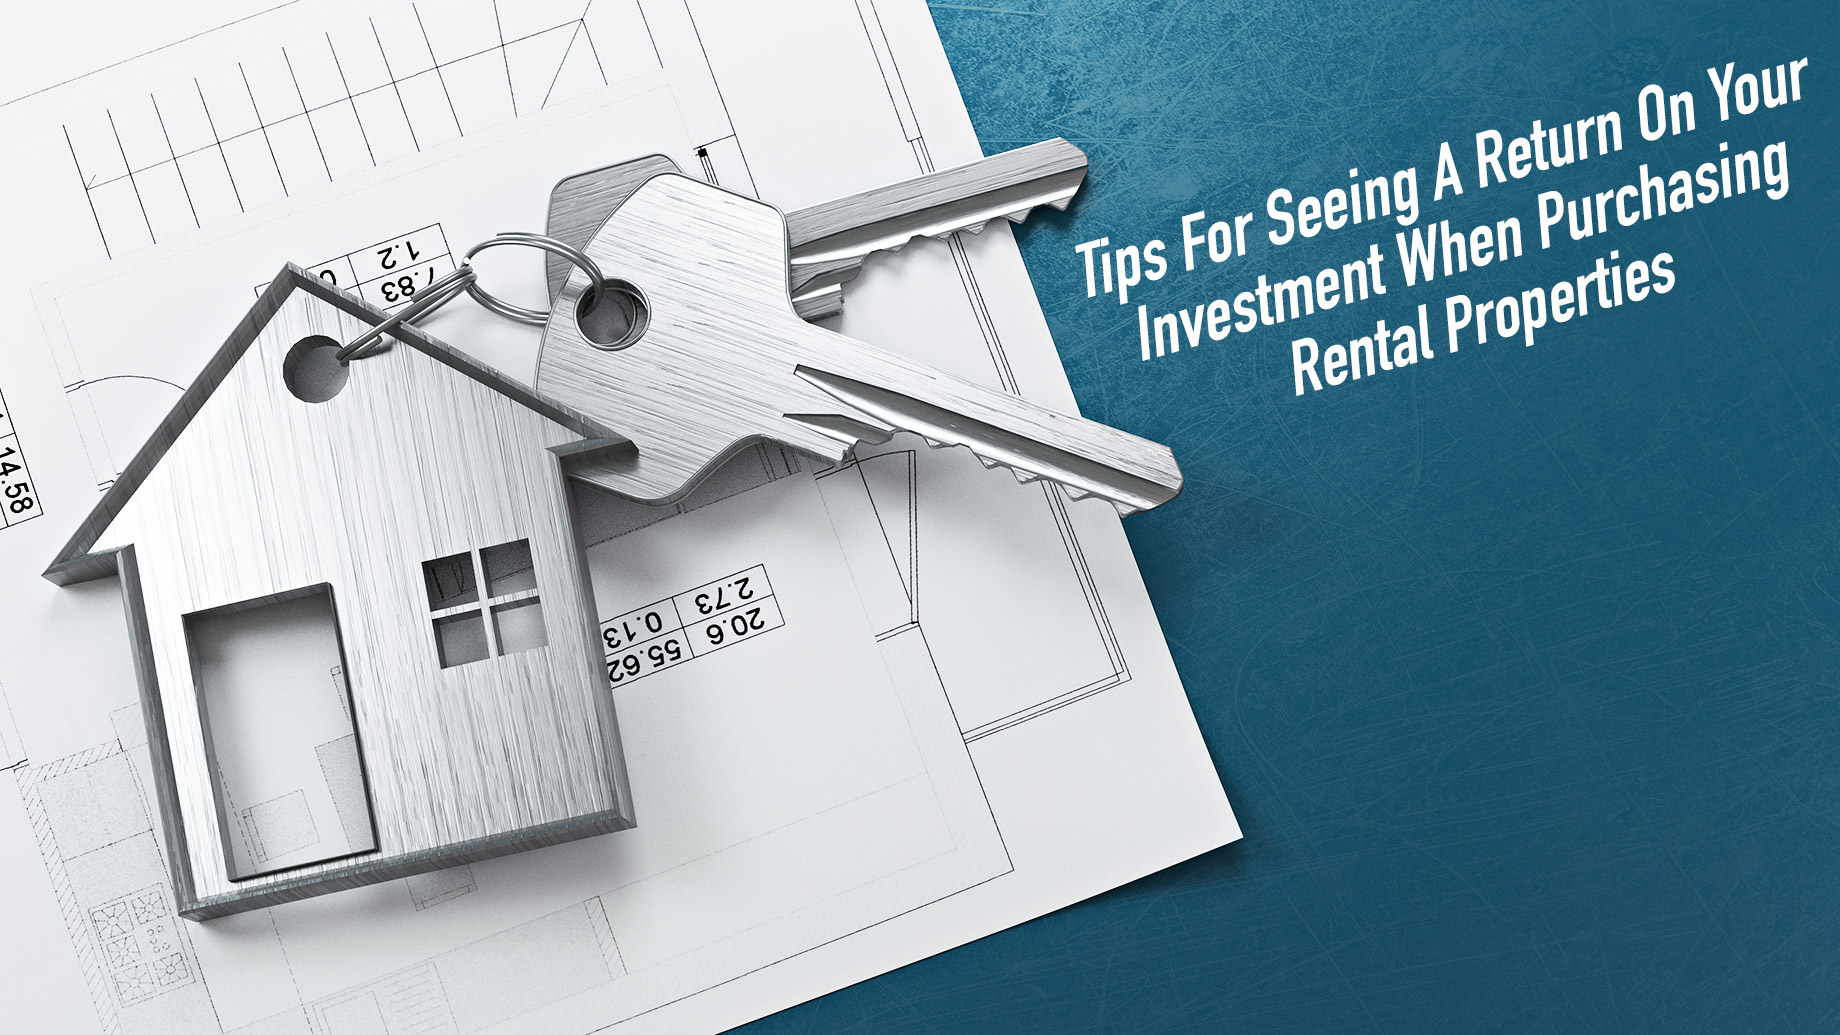 Tips For Seeing A Return On Your Investment When Purchasing Rental Properties